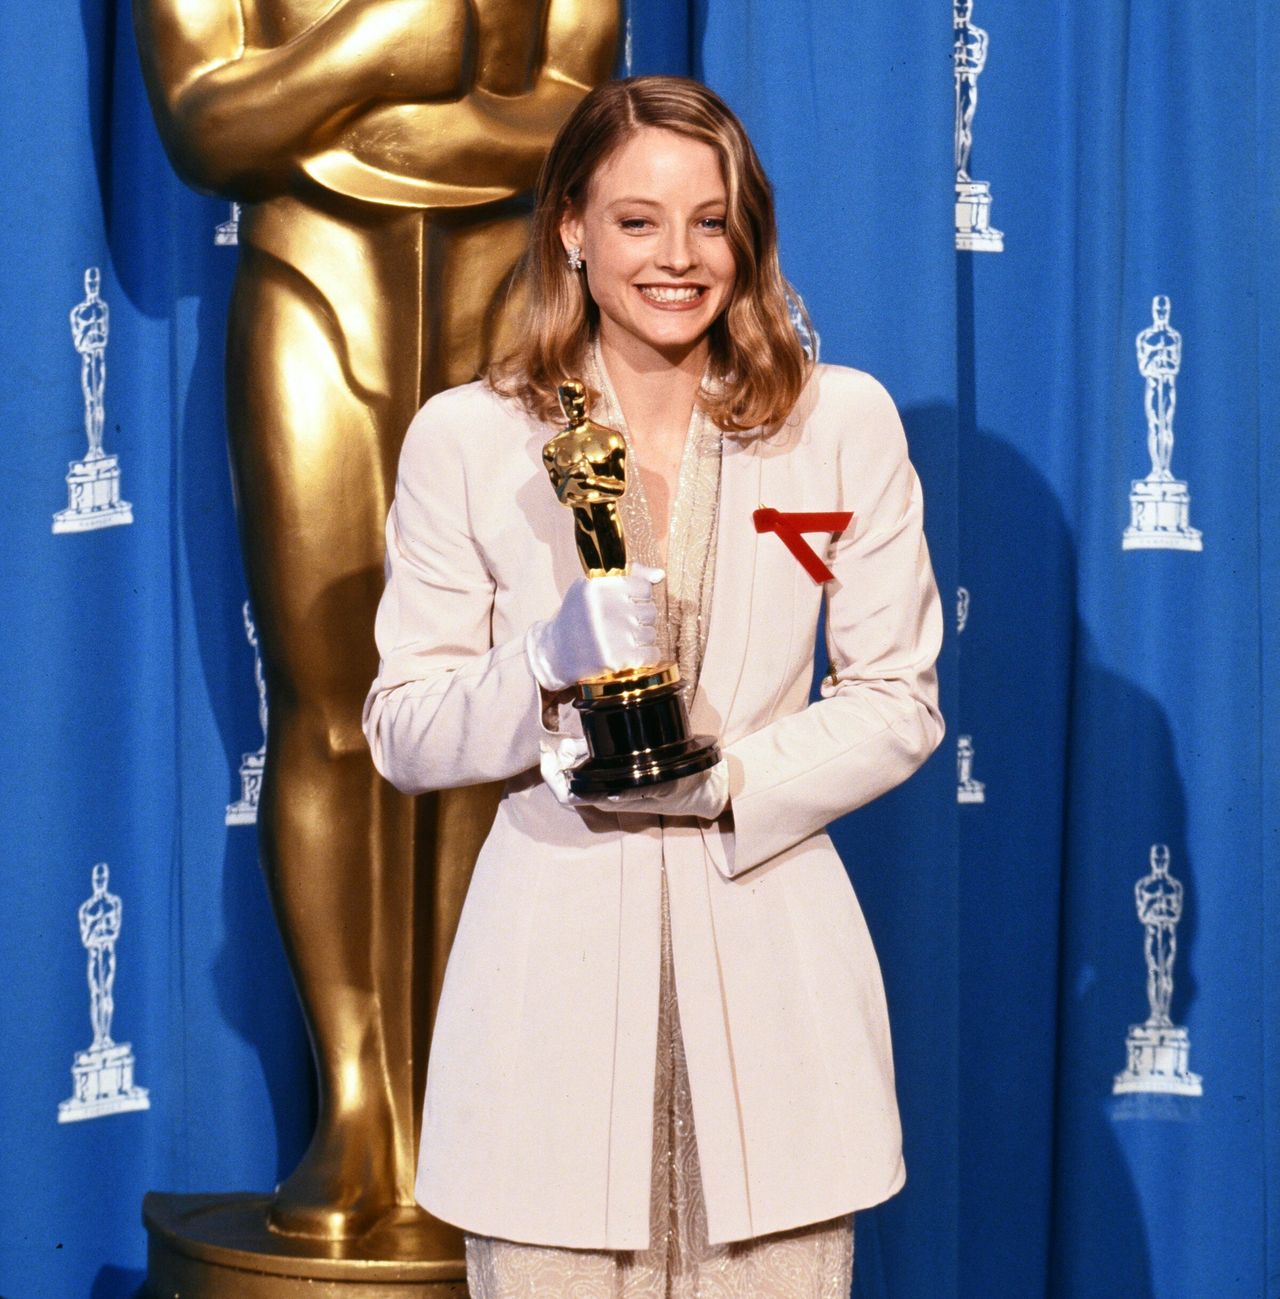 Jodie Foster with her Oscar for "The Silence of the Lambs" in March 1992.